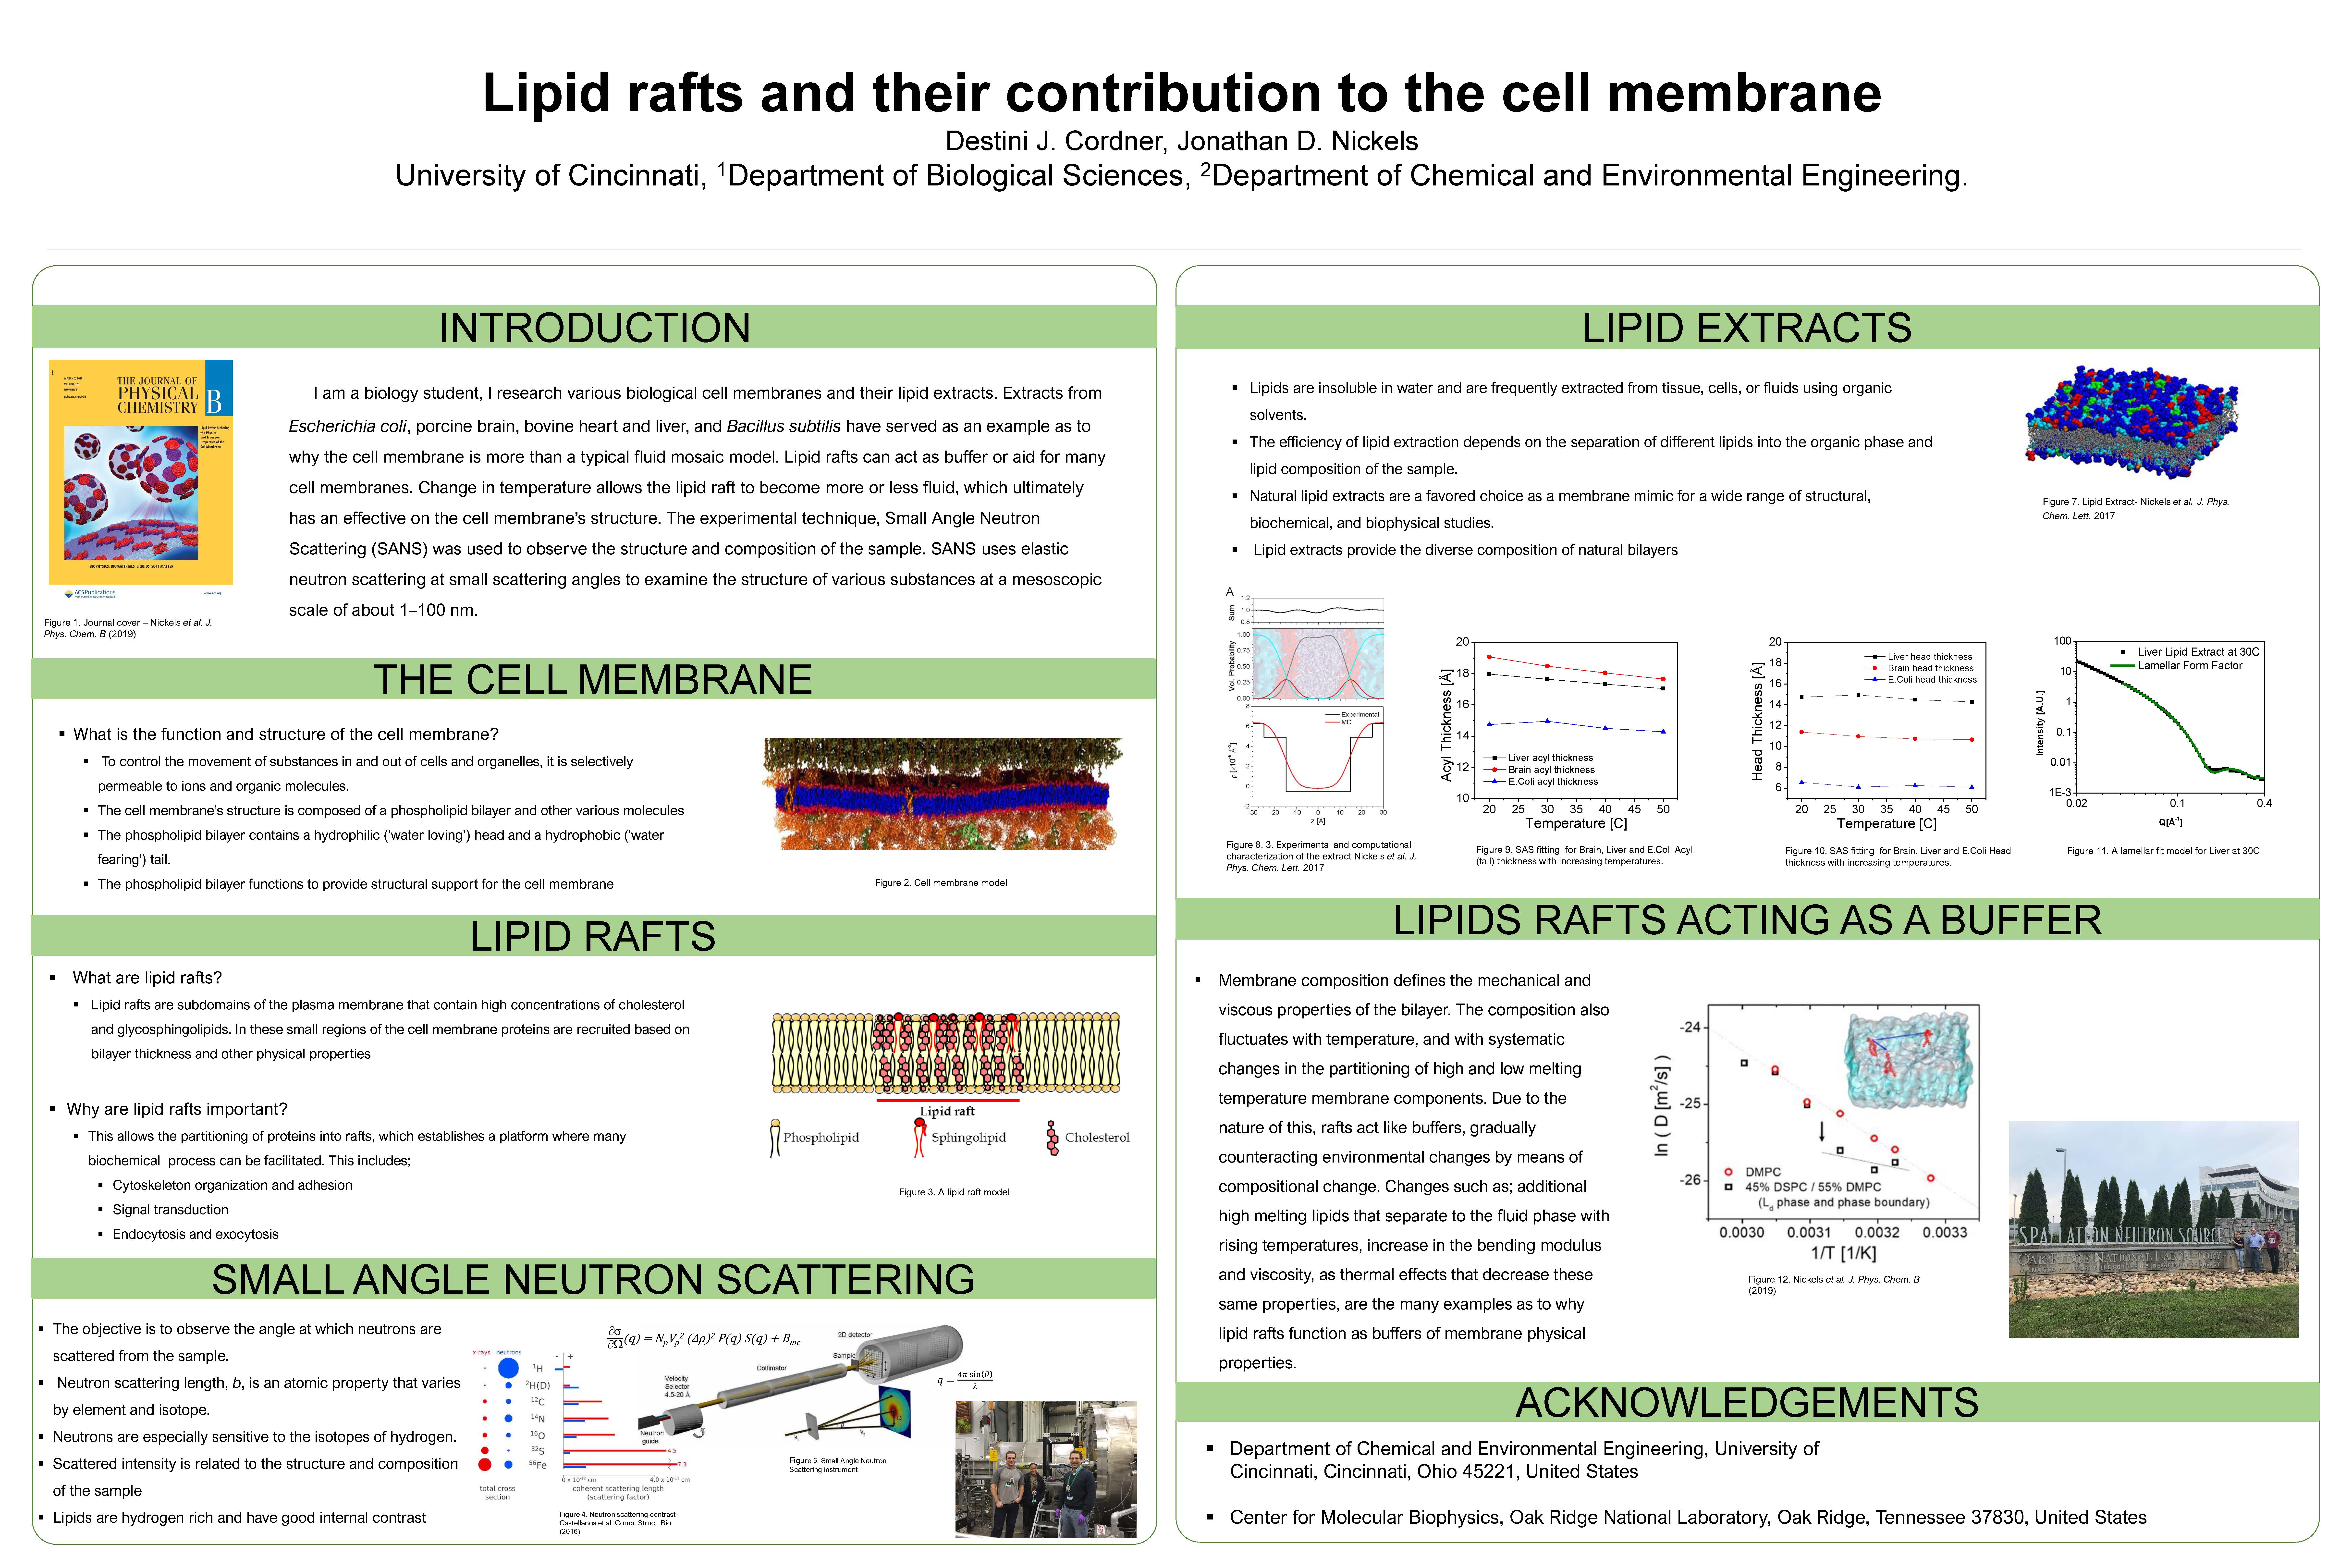 Lipid rafts and their contribution to the cell membrane.